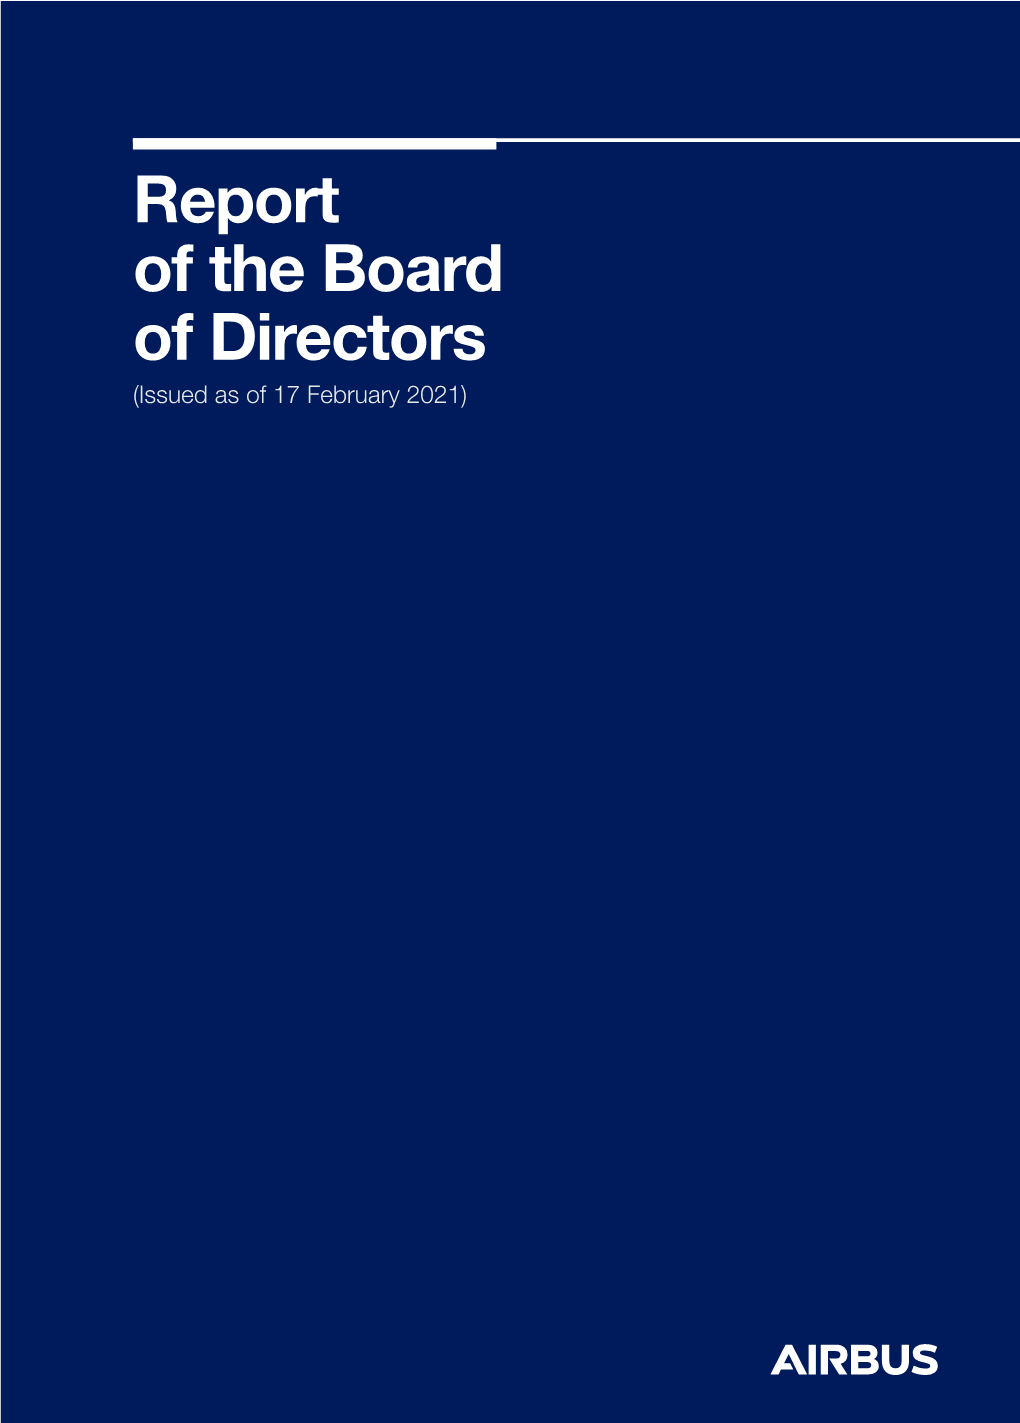 Report of the Board of Directors (Issued As of 17 February 2021) 1